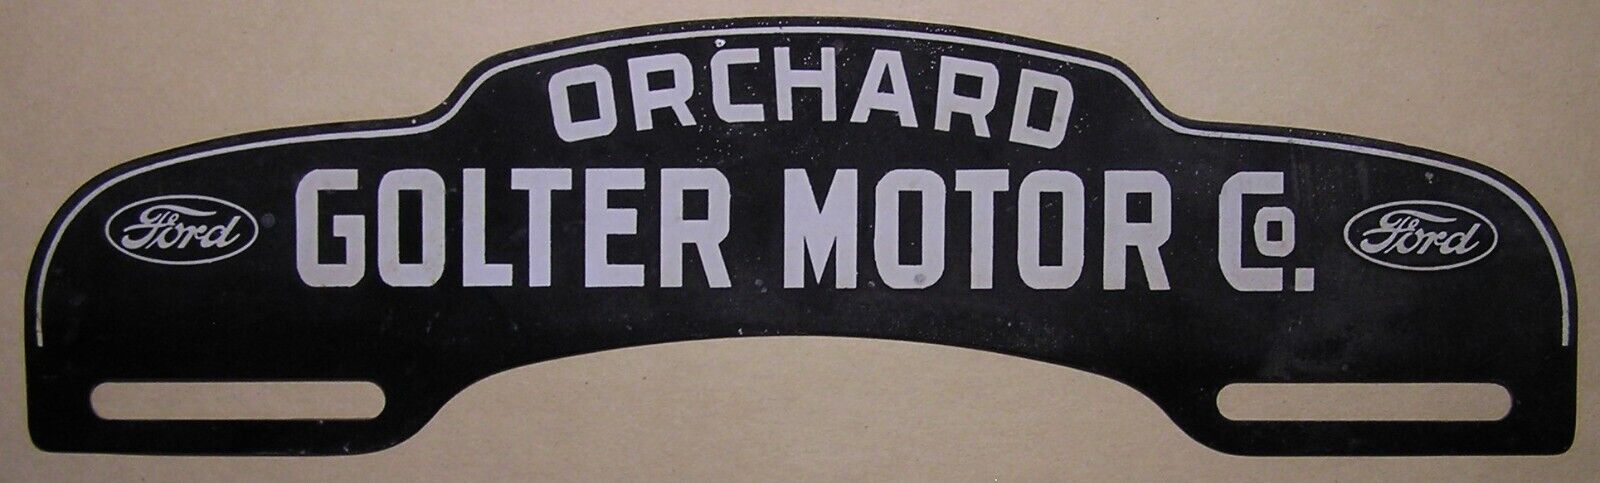 VINTAGE FORD ORCHARD GOLTER MOTOR CO ADVERTISING LICENSE PLATE TOPPER - NOS